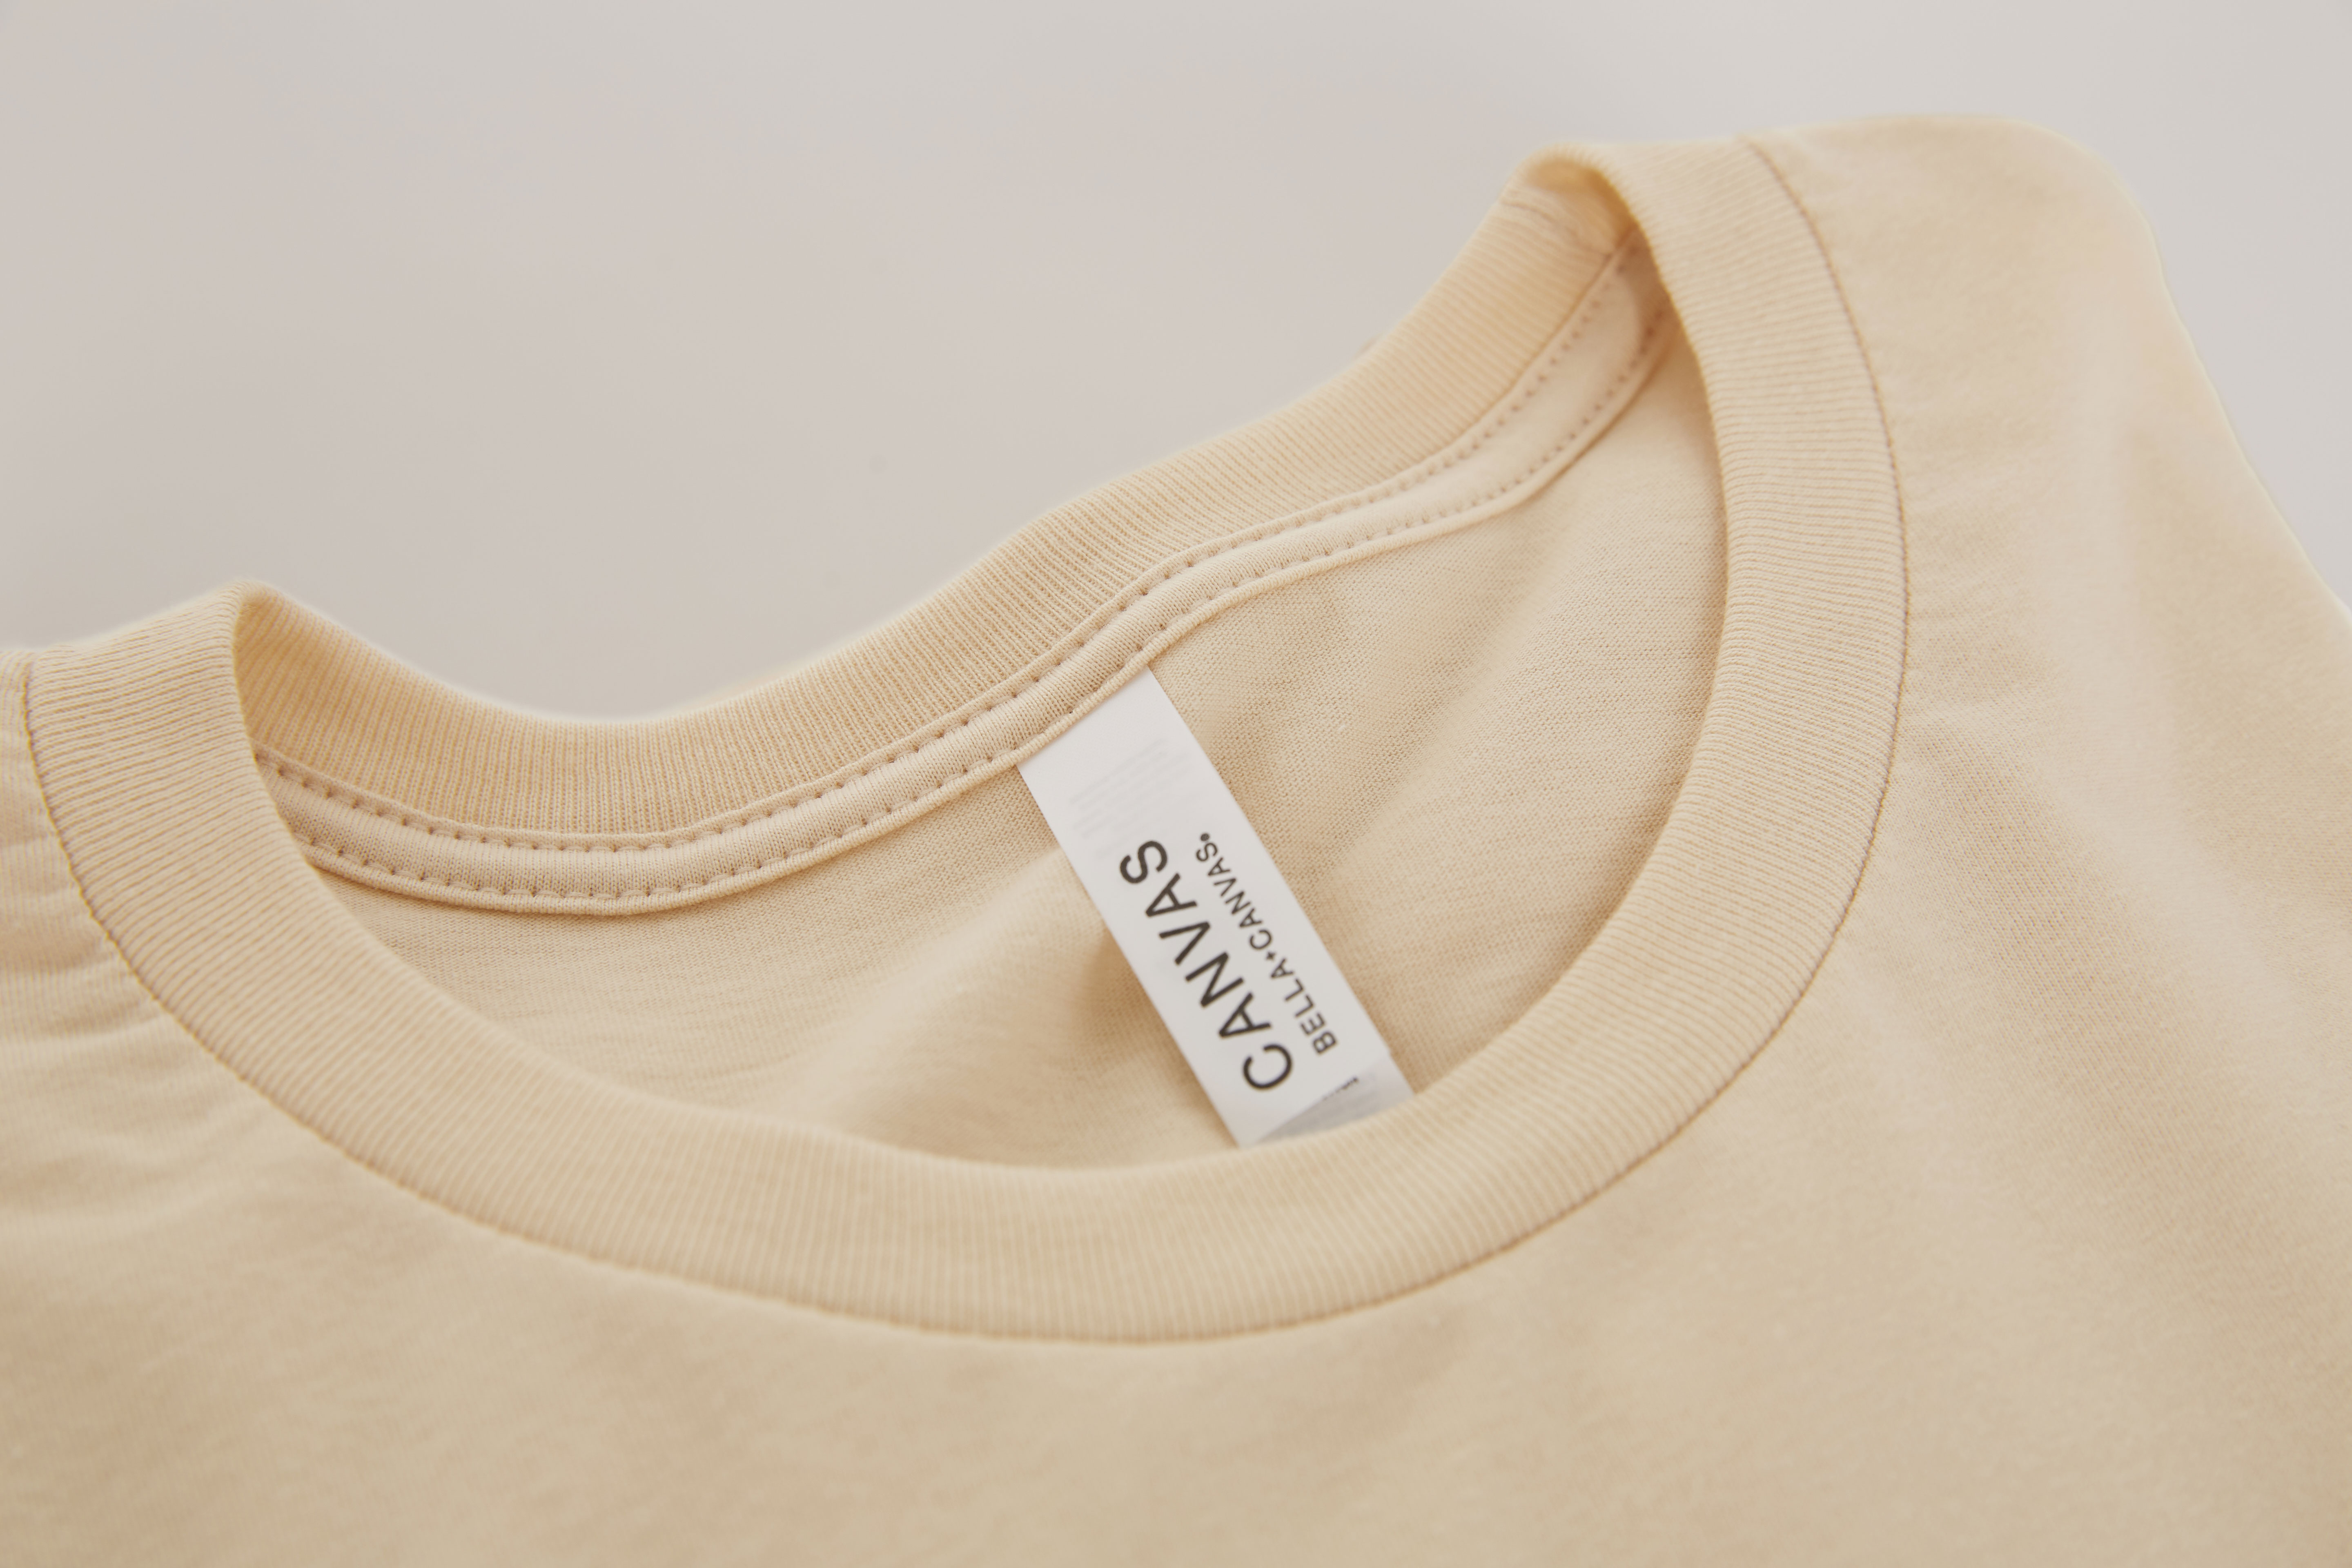 Bella+Canvas 3001C Unisex Jersey Short Sleeve Crewneck T-Shirt from ShirtSpace pictured in the color soft cream.